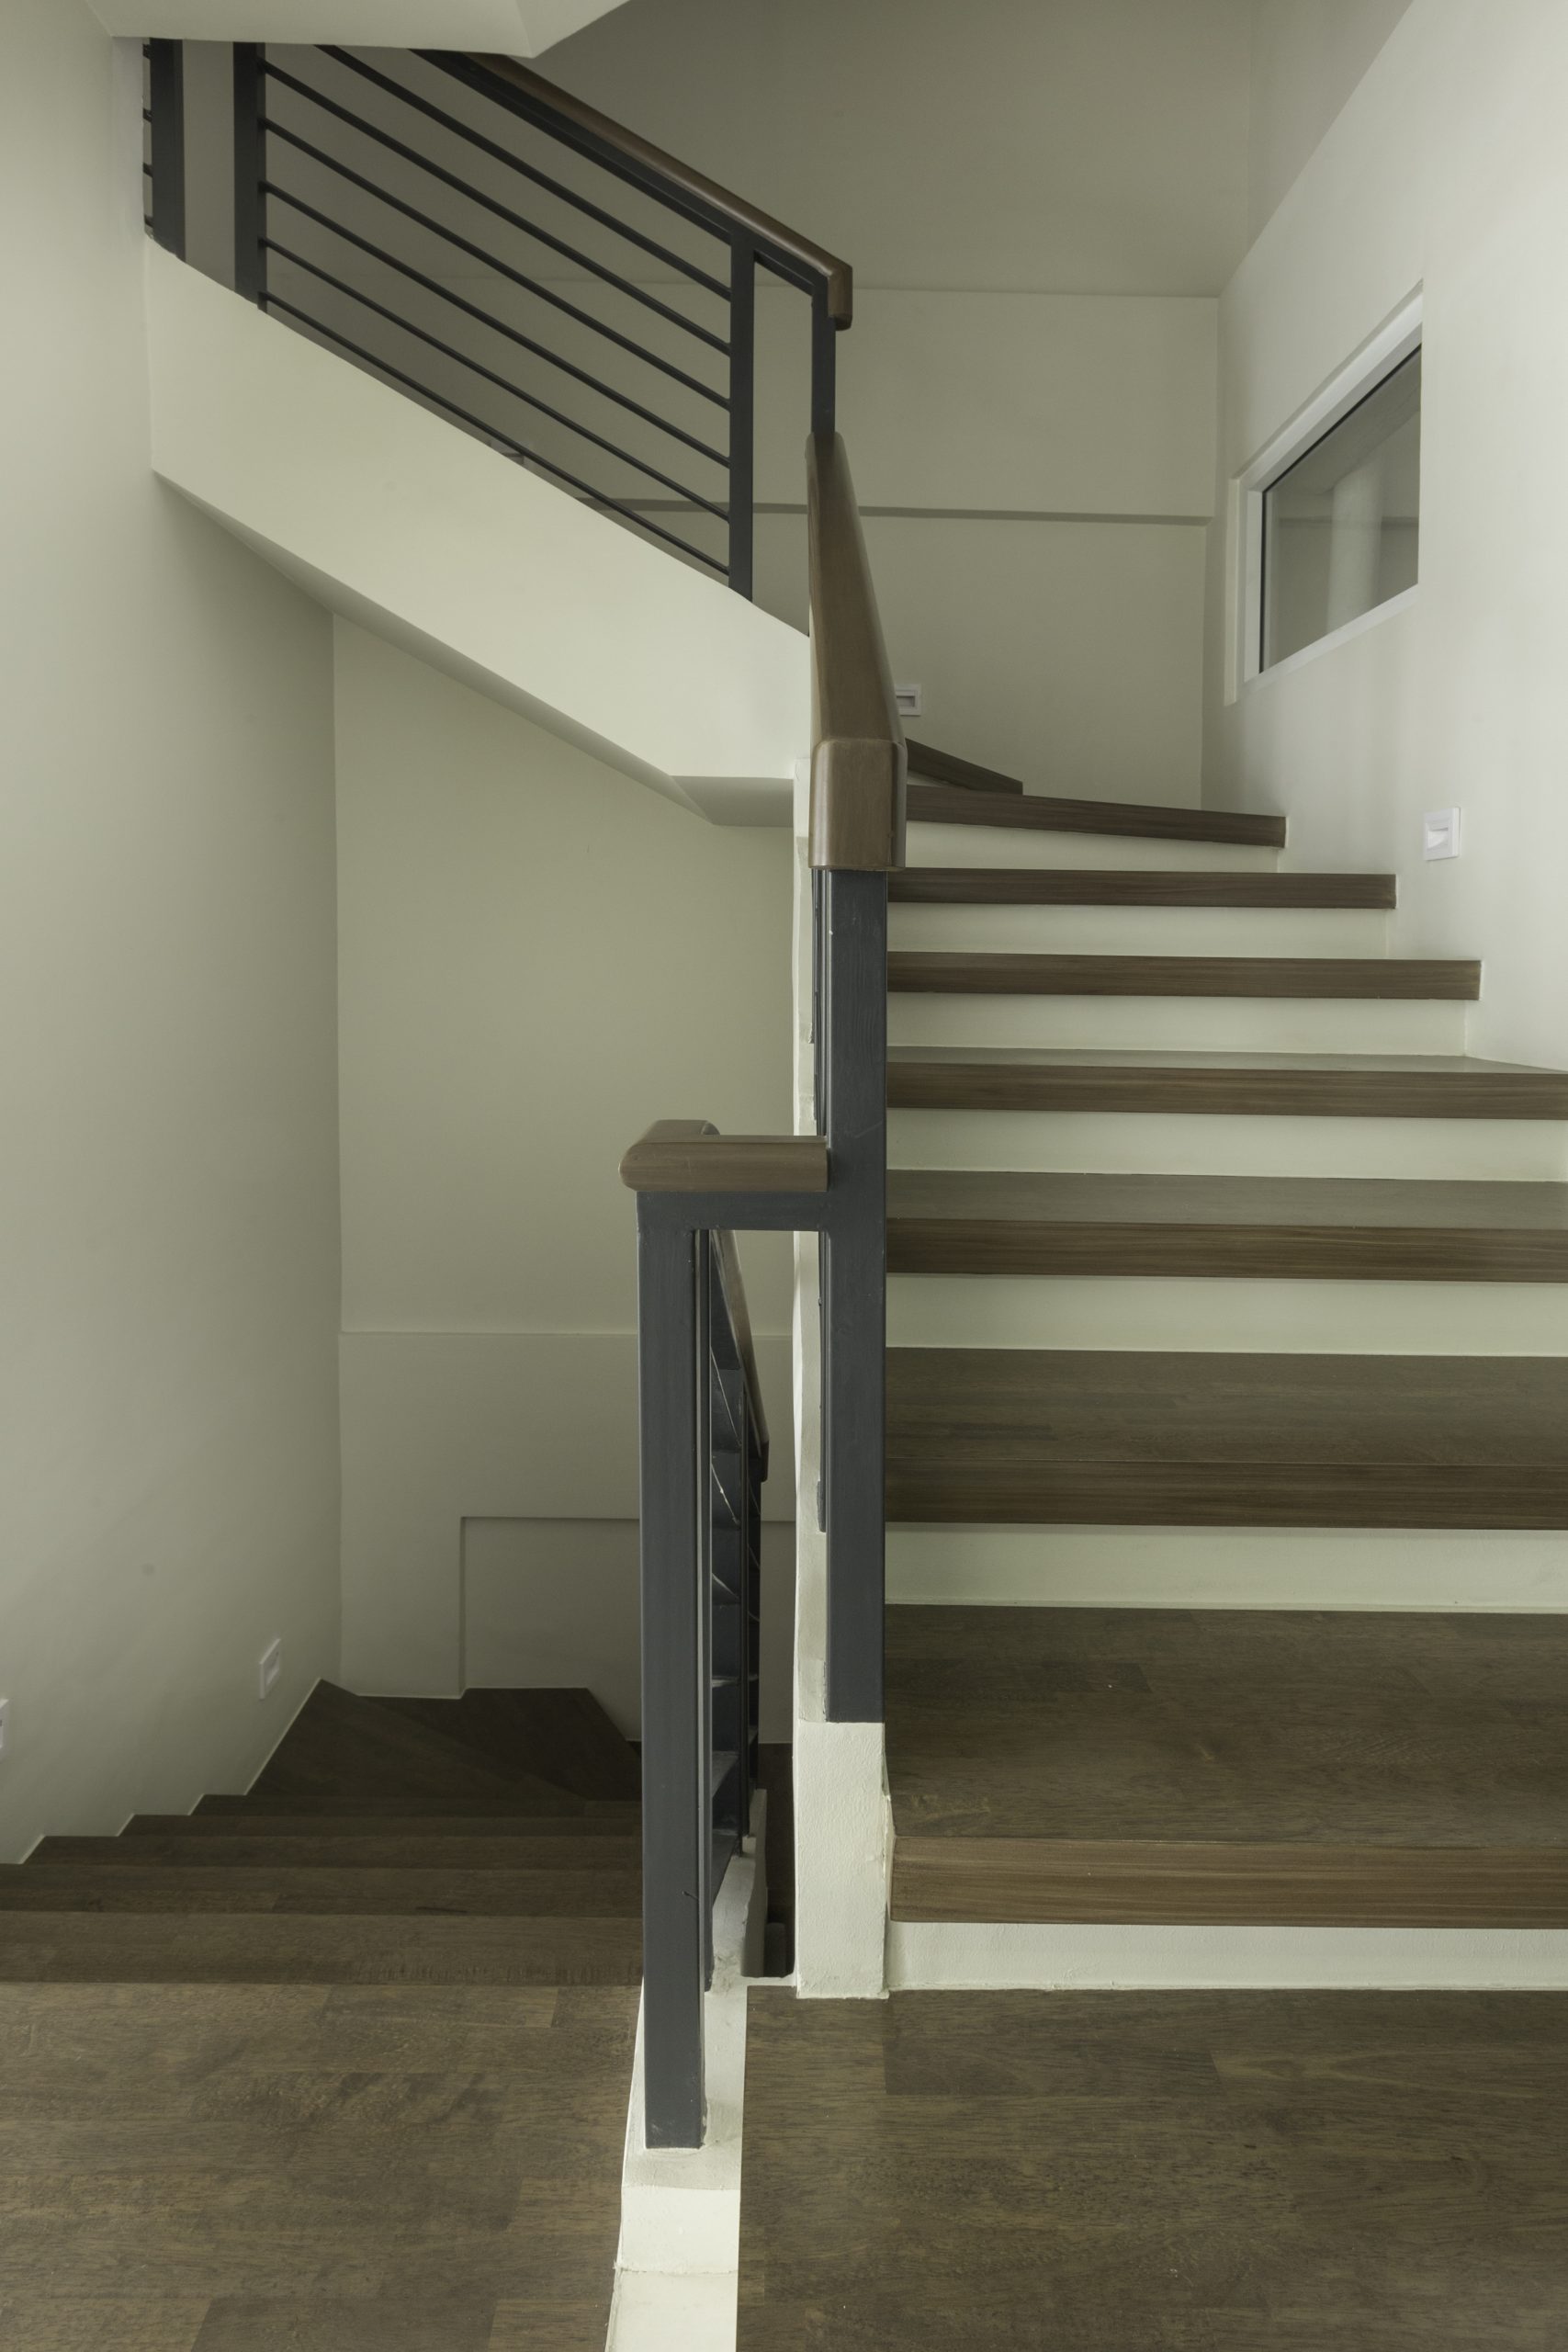 Engineered Rubber Wood Stair Planks - Walnut Stained